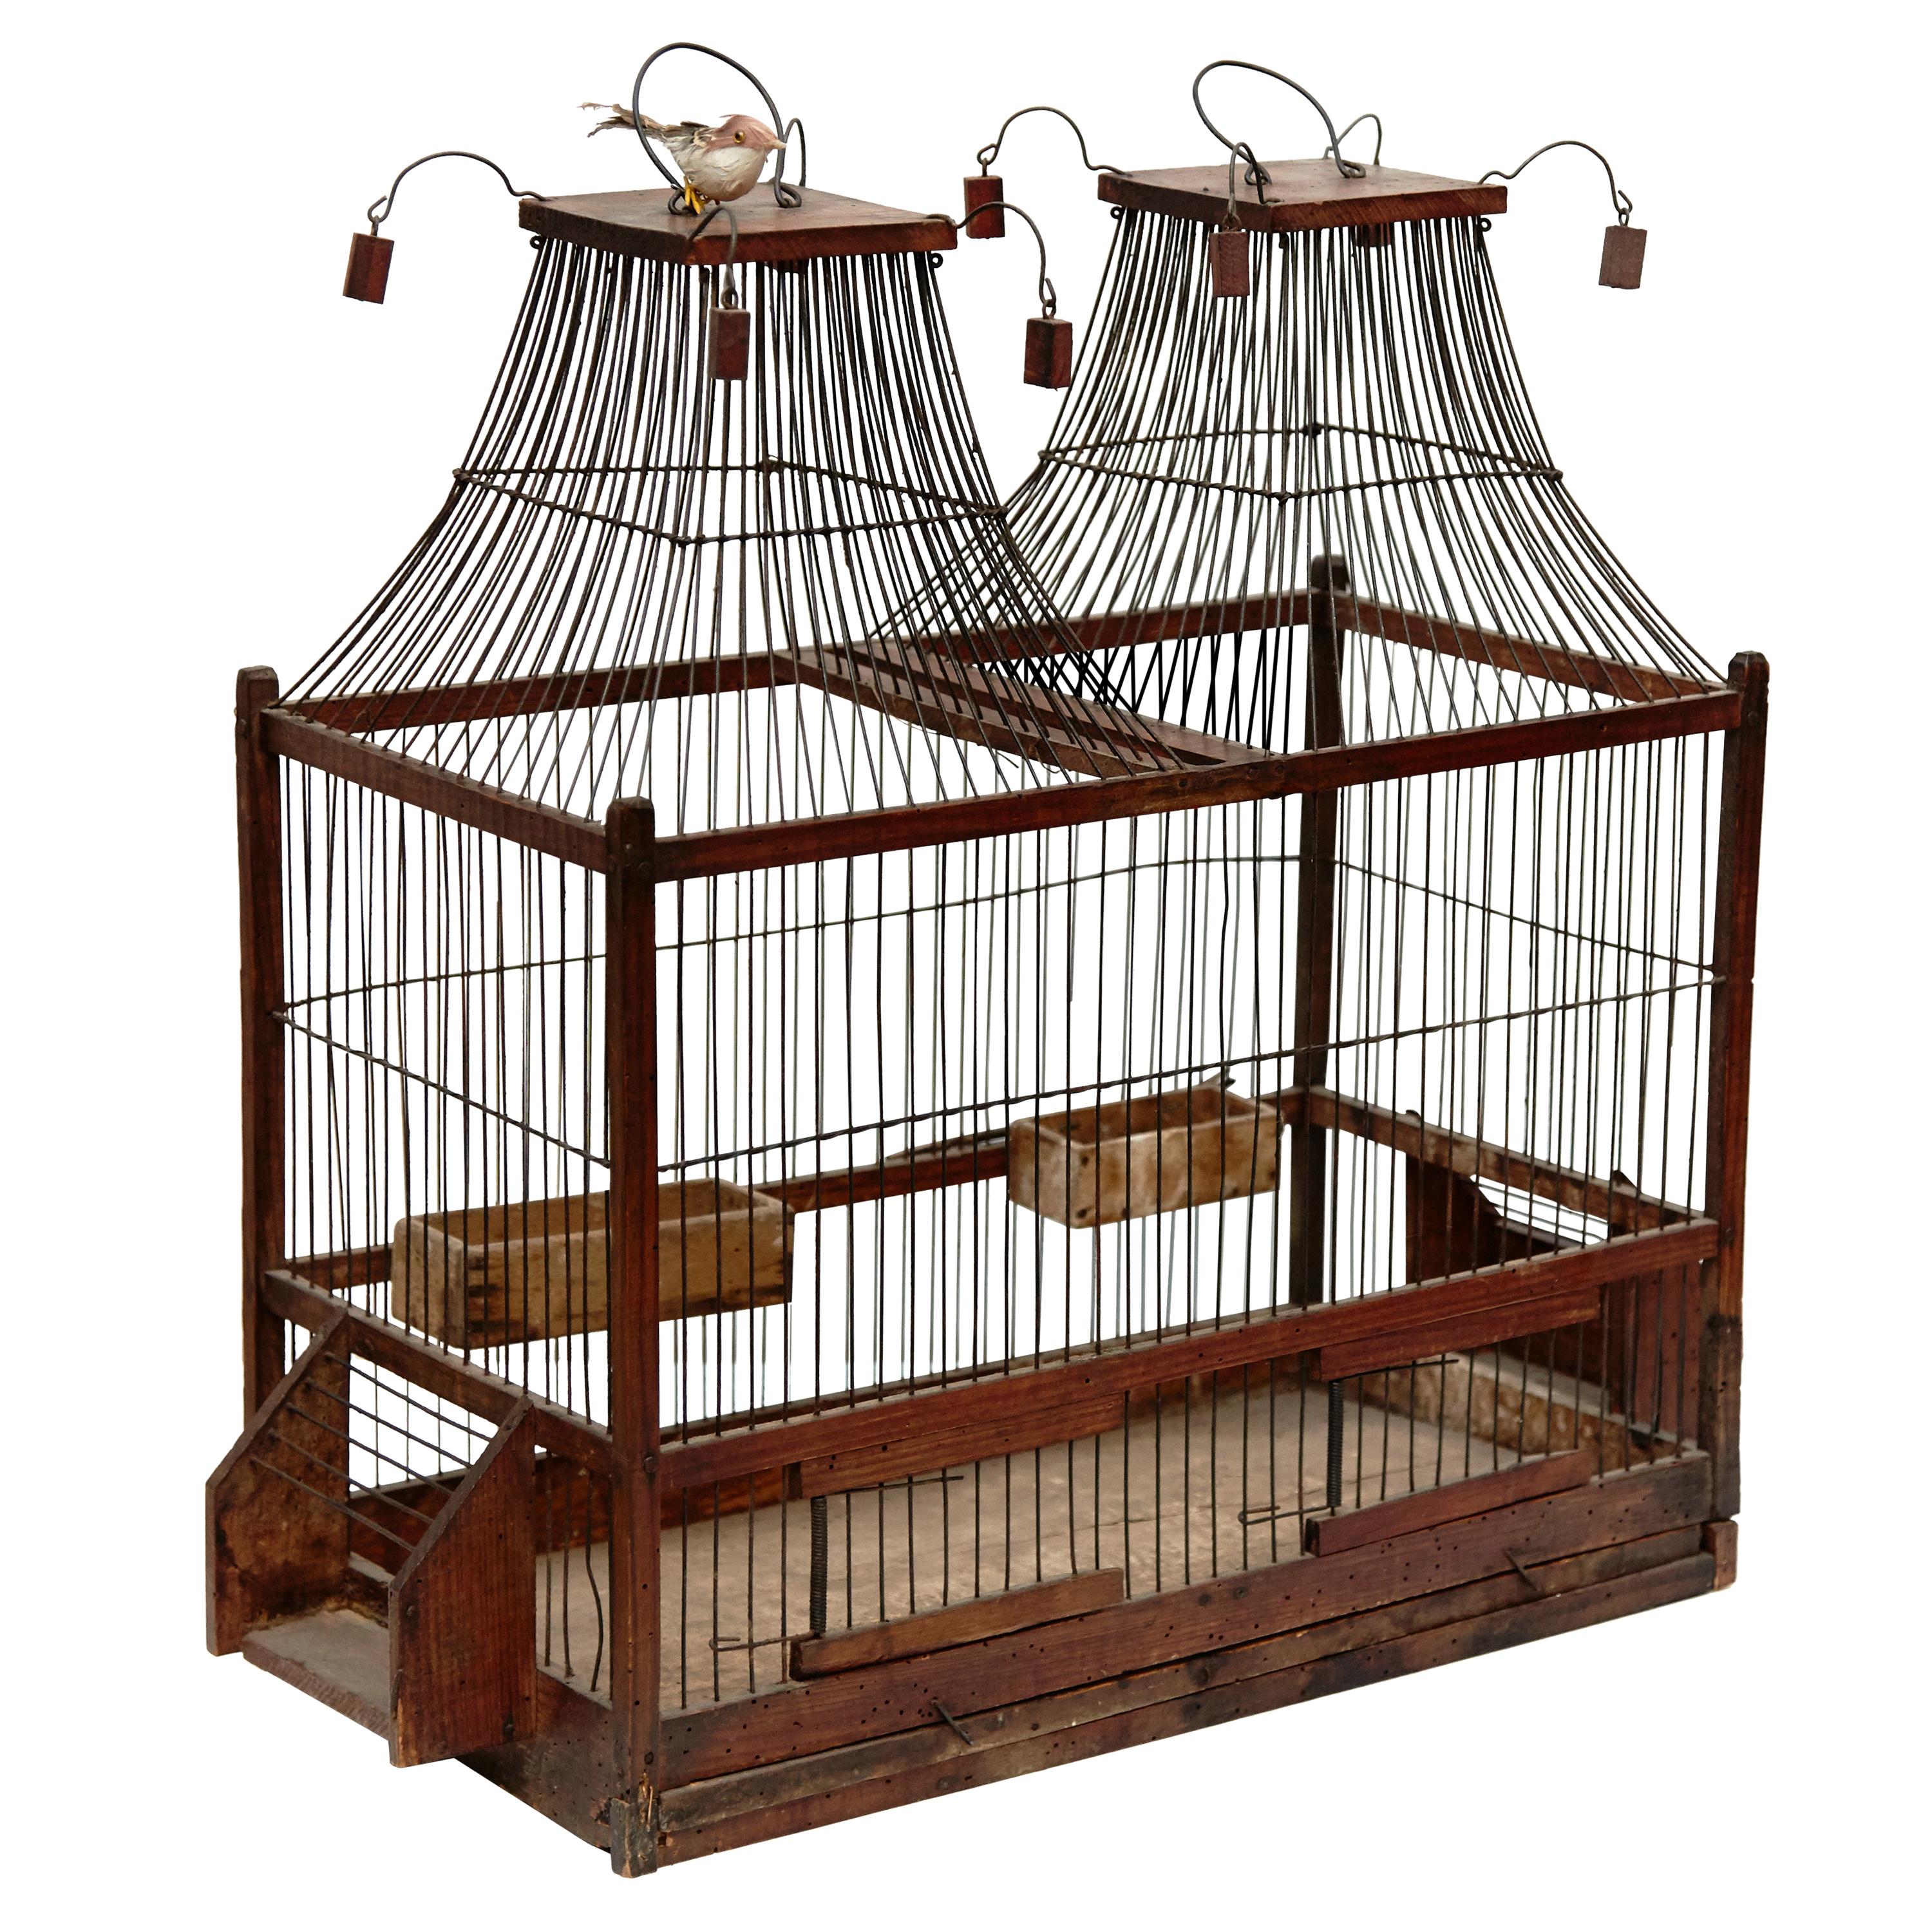 Wood Popular Traditional Bird Cage in Wood and Metal from France, circa 1930